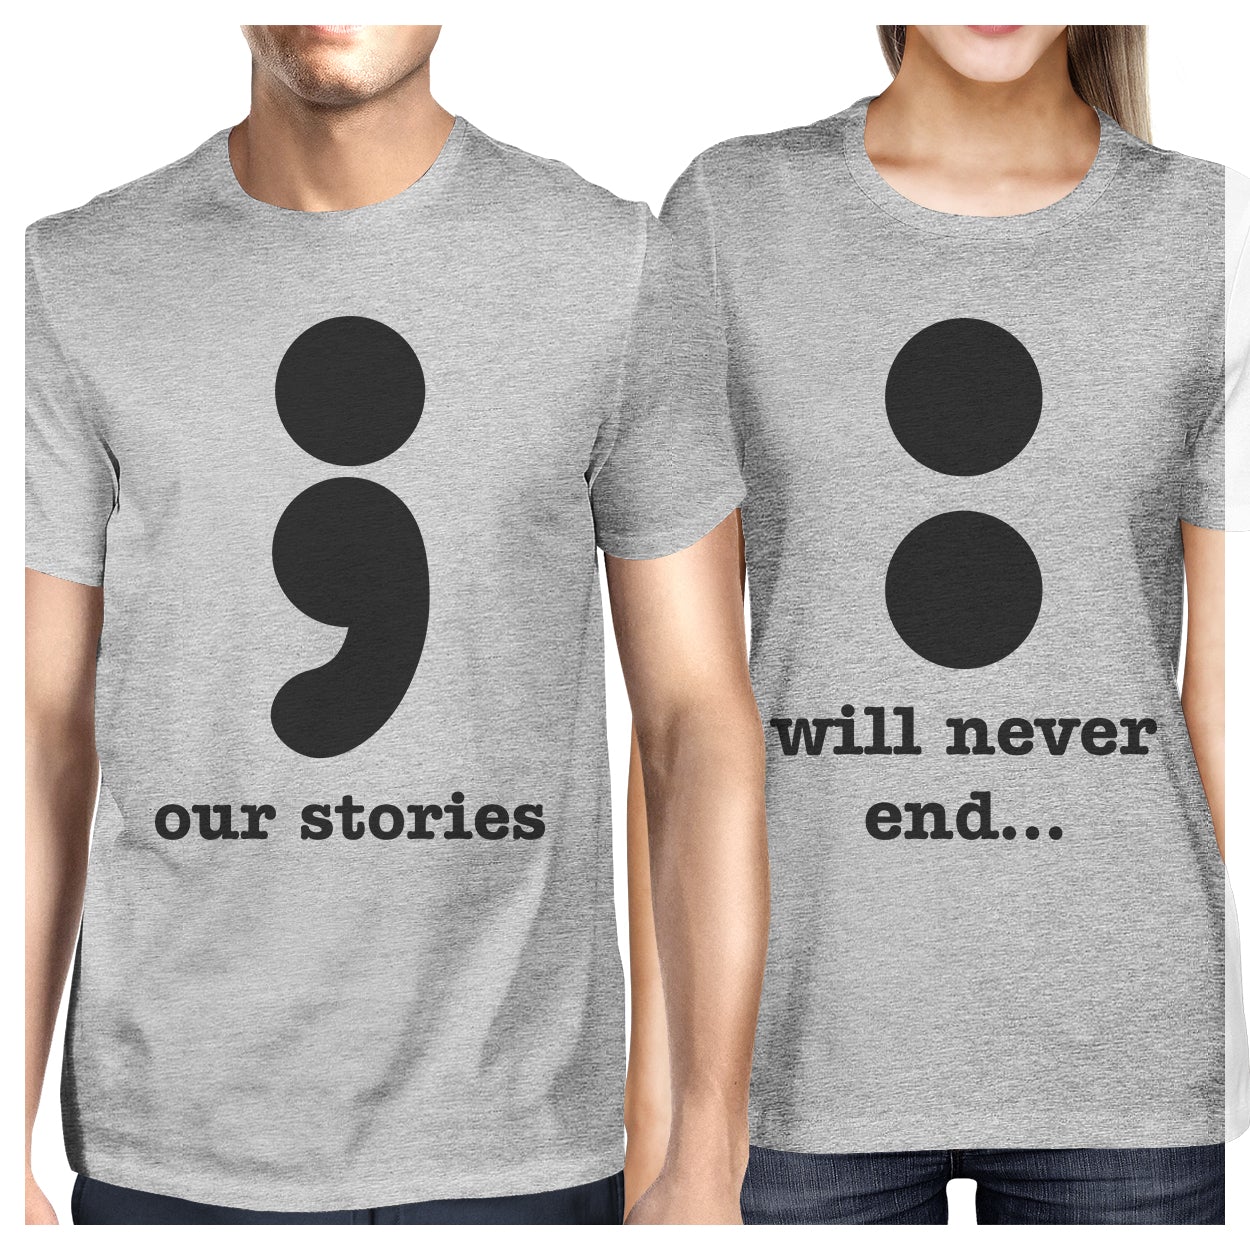 Our Stories Will Never End Matching Couple Grey Shirts